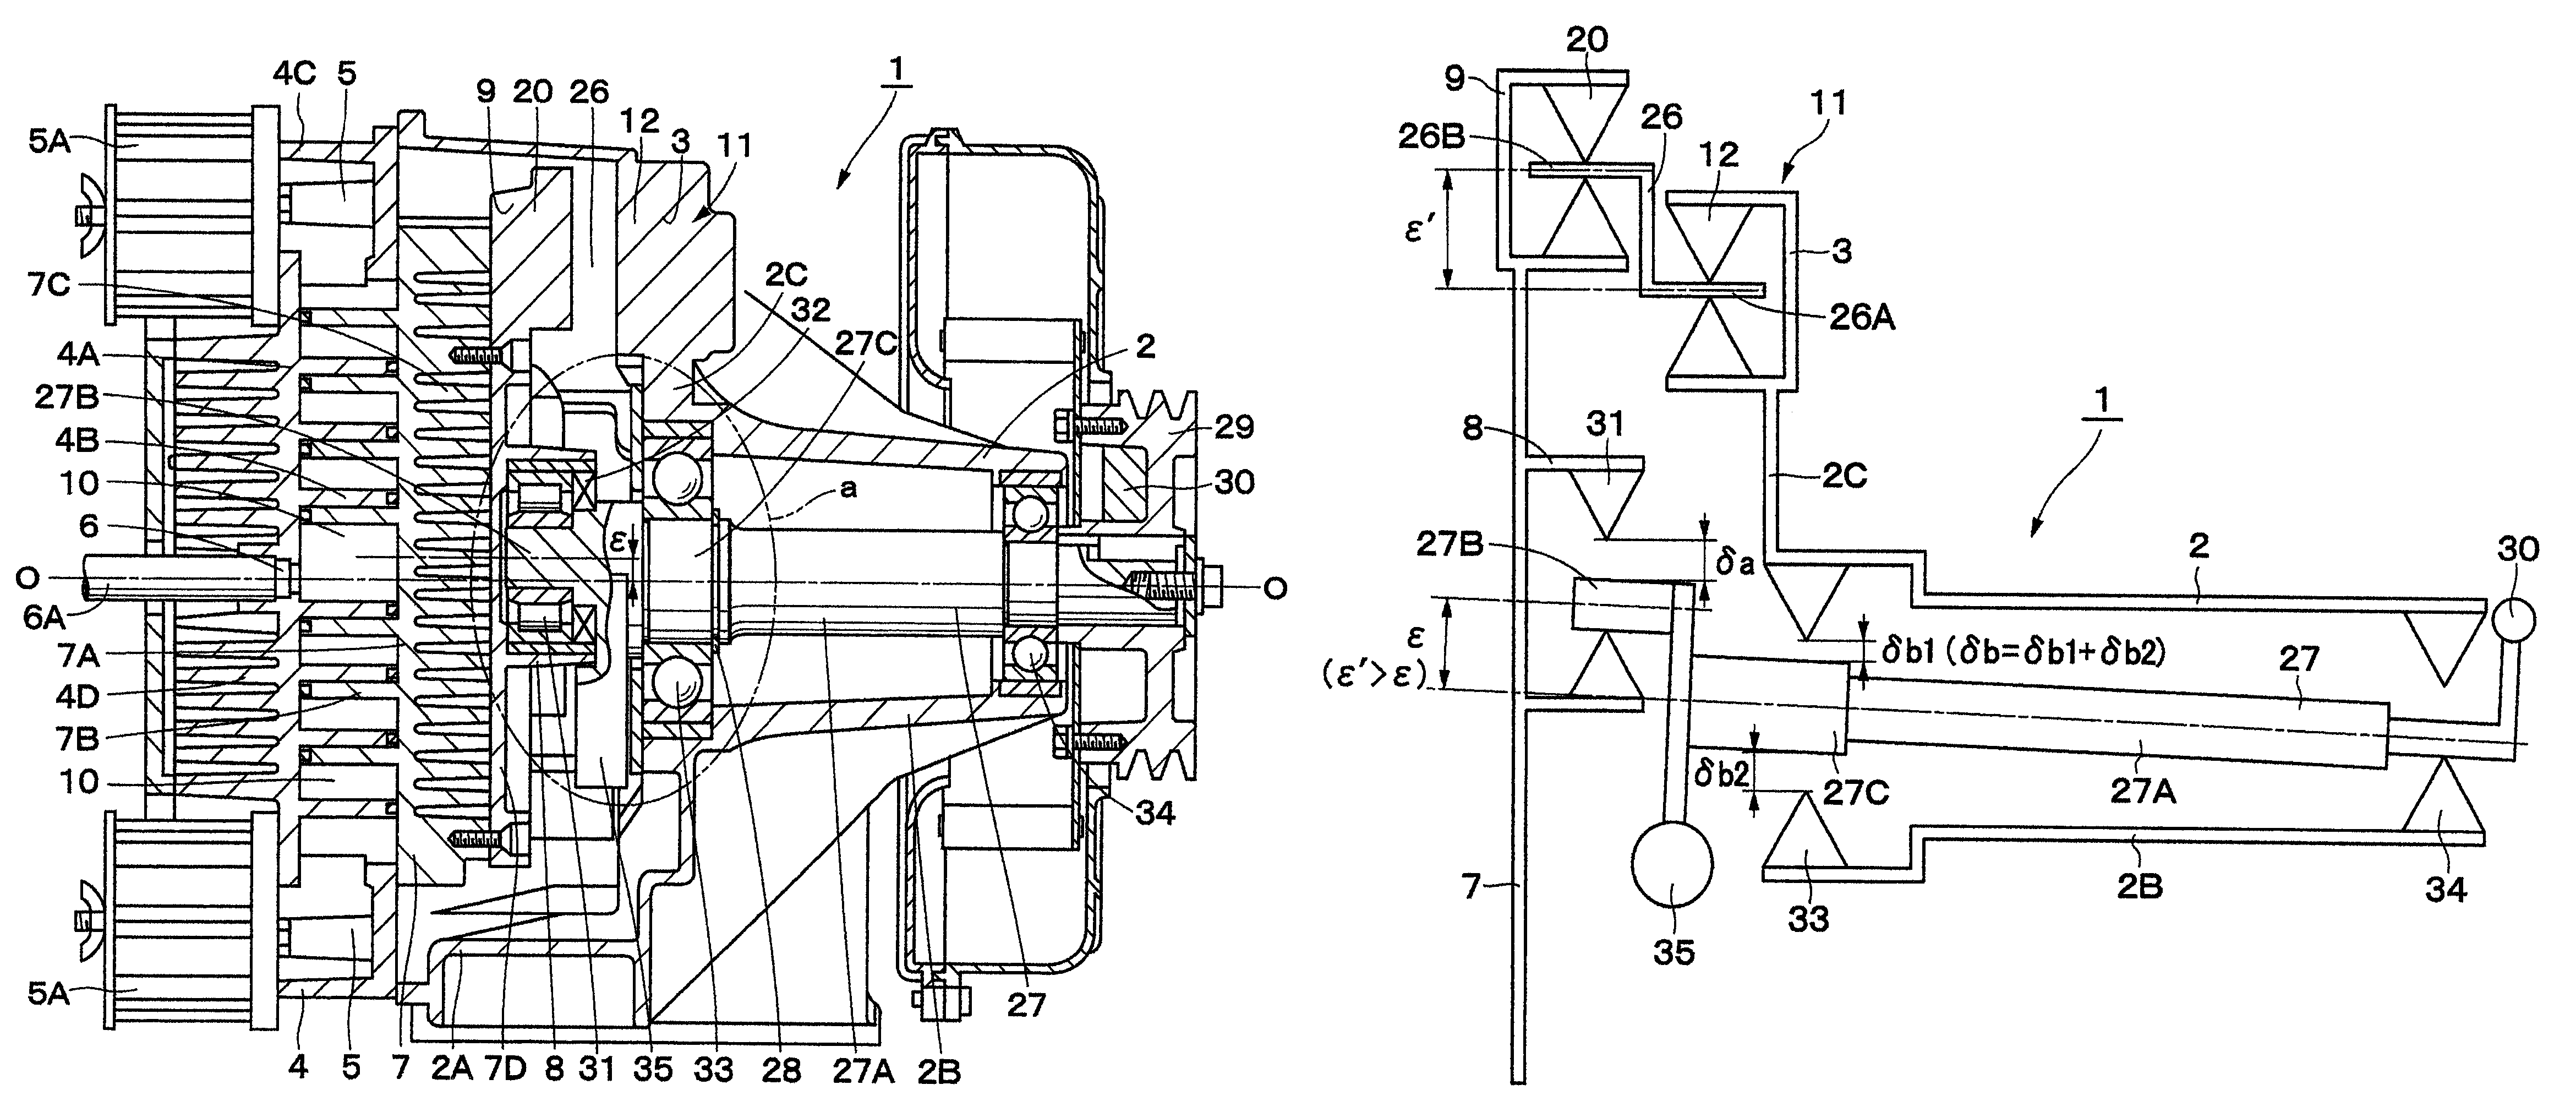 Bearings of a scroll type machine with crank mechanism